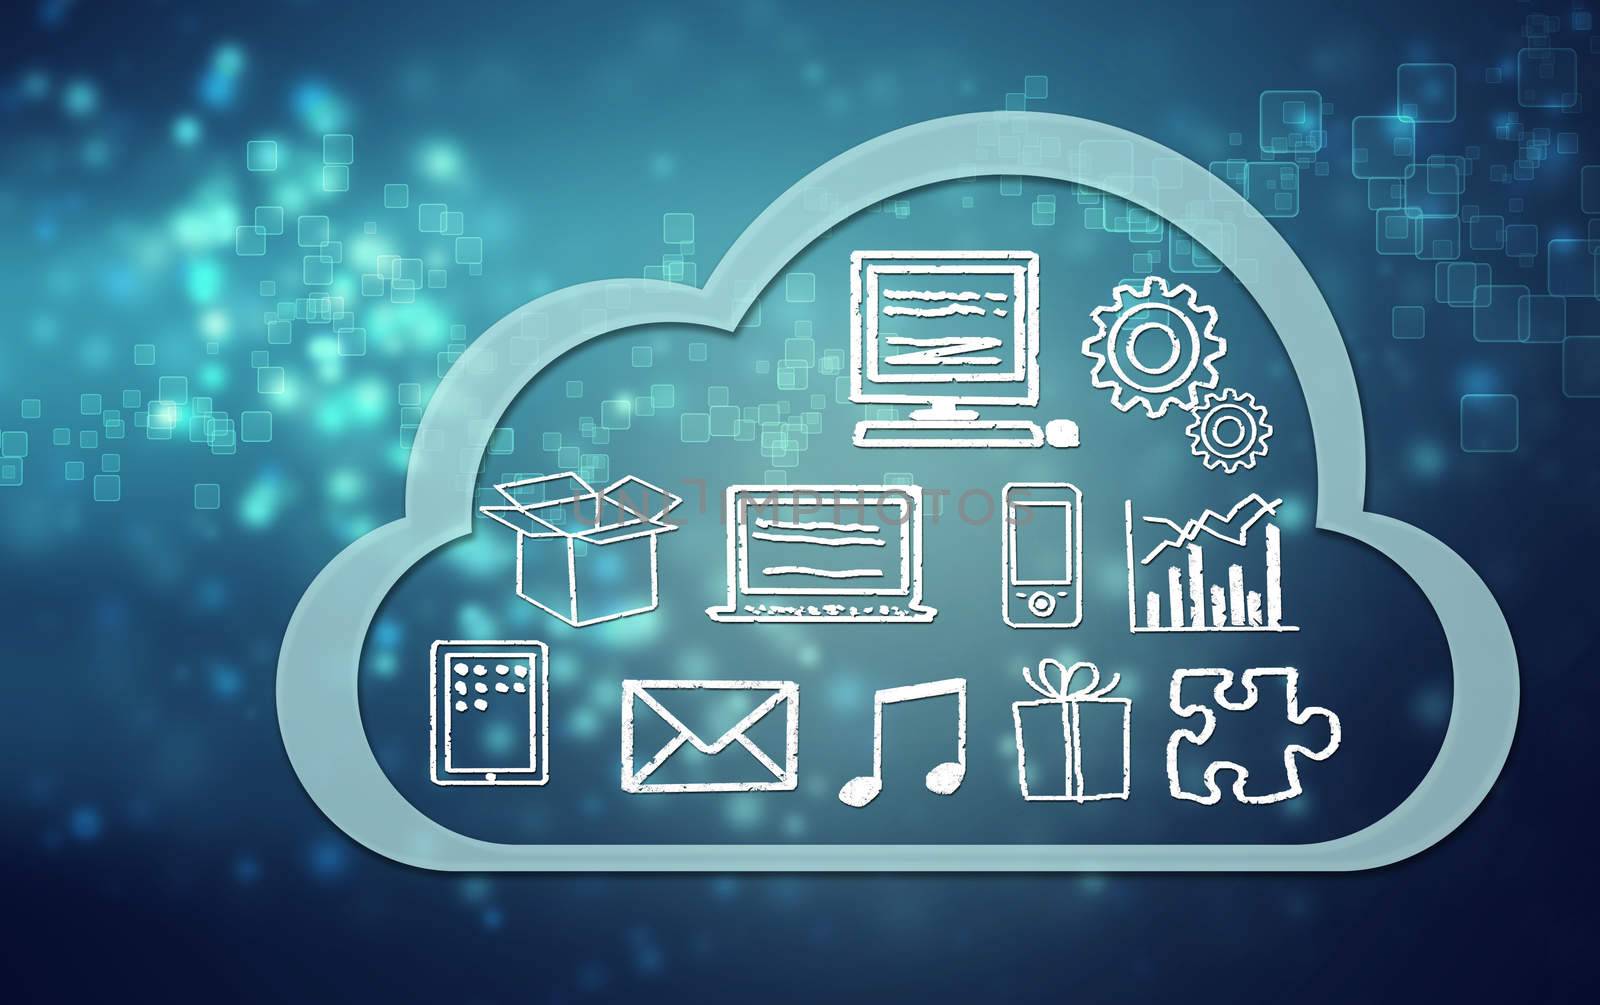 Cloud computing concept icons and symbols on blue background